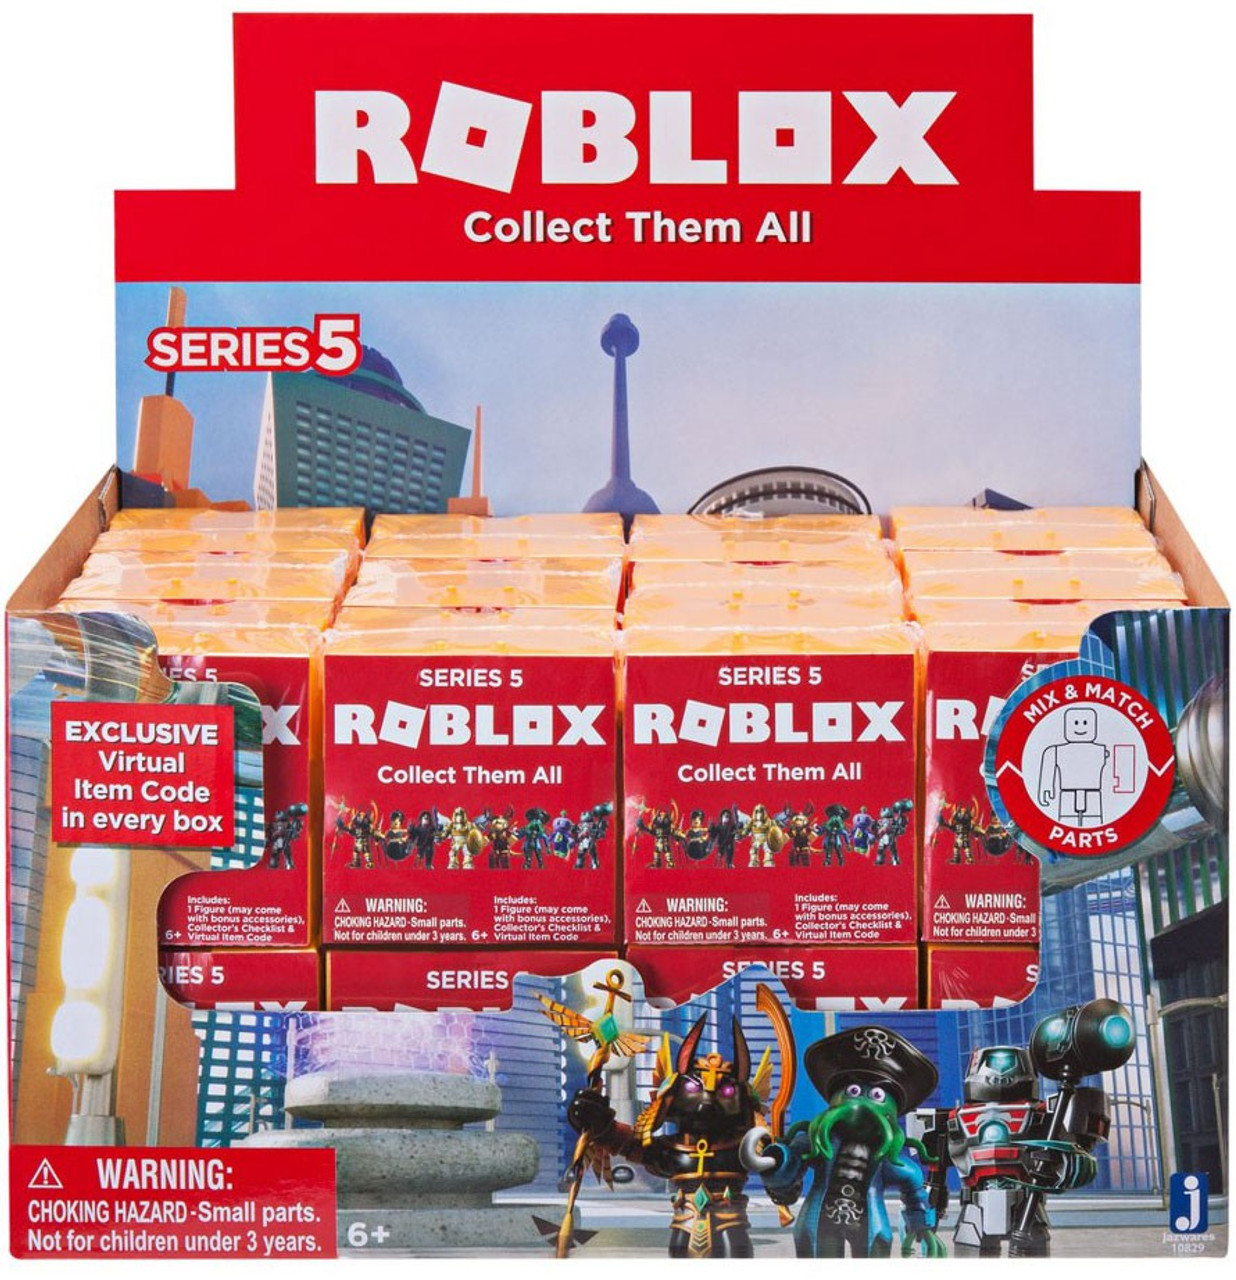 Roblox Series 5 Yellow Gold Blind Box Toys Figures1 2 3 4 - body parts roblox codes